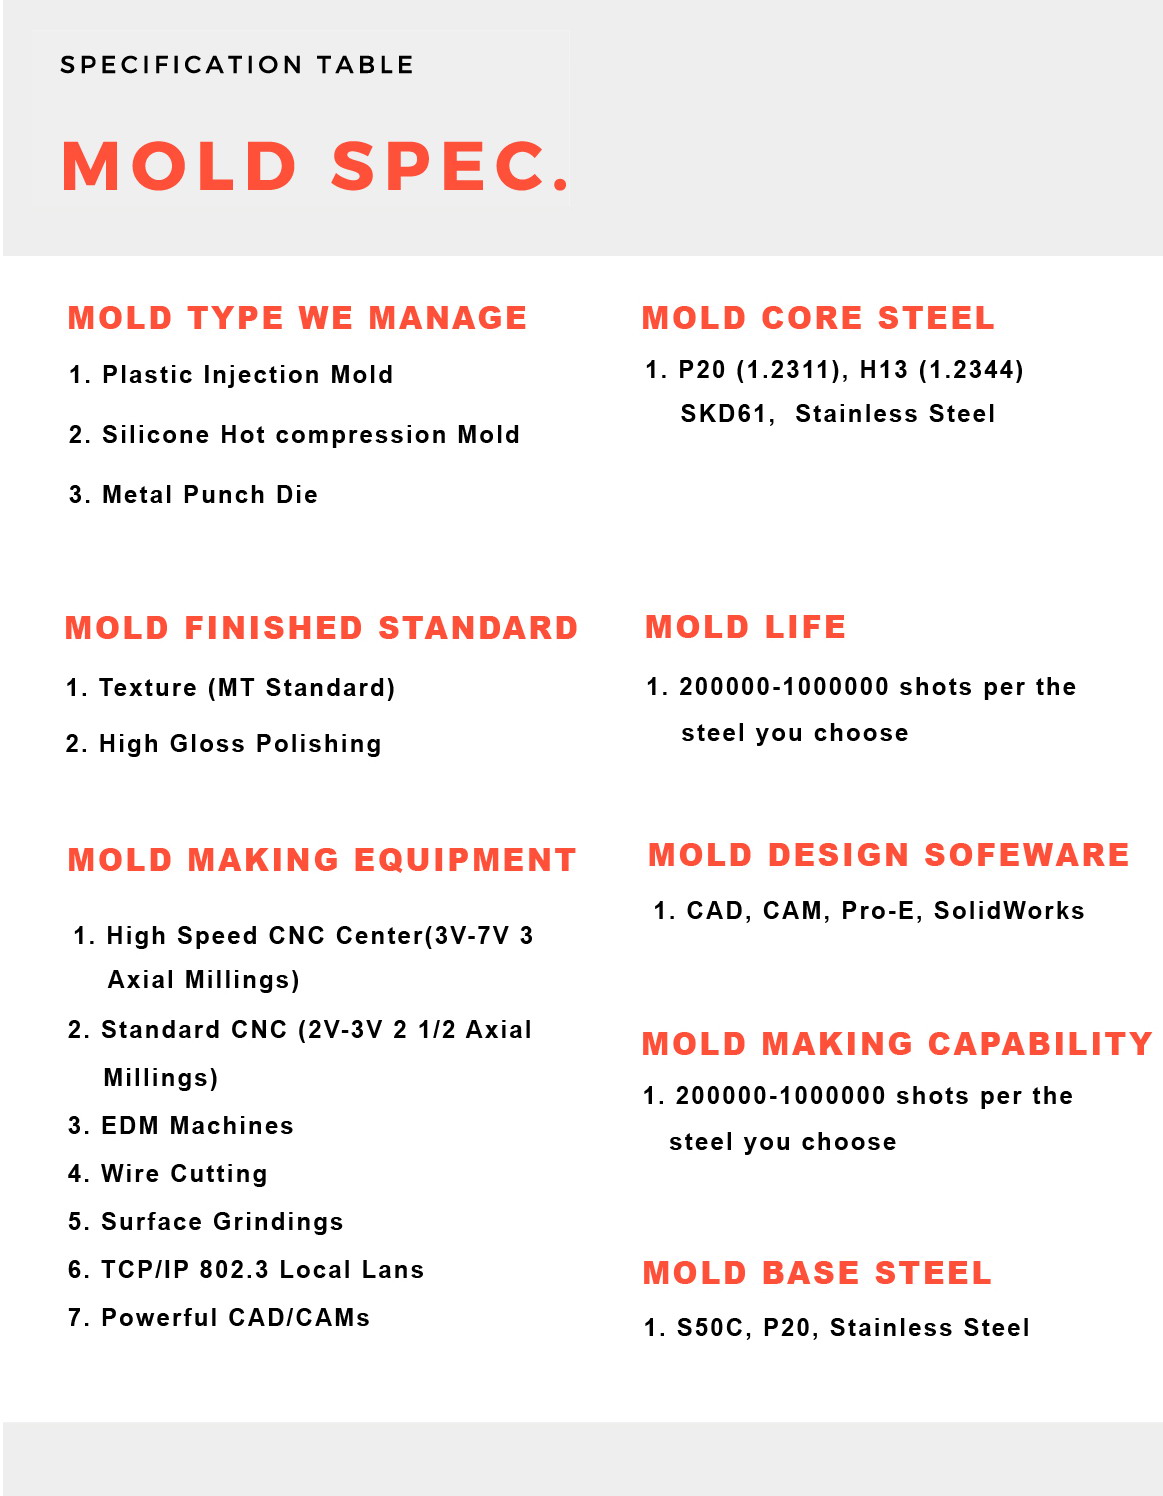 Get a mold quote